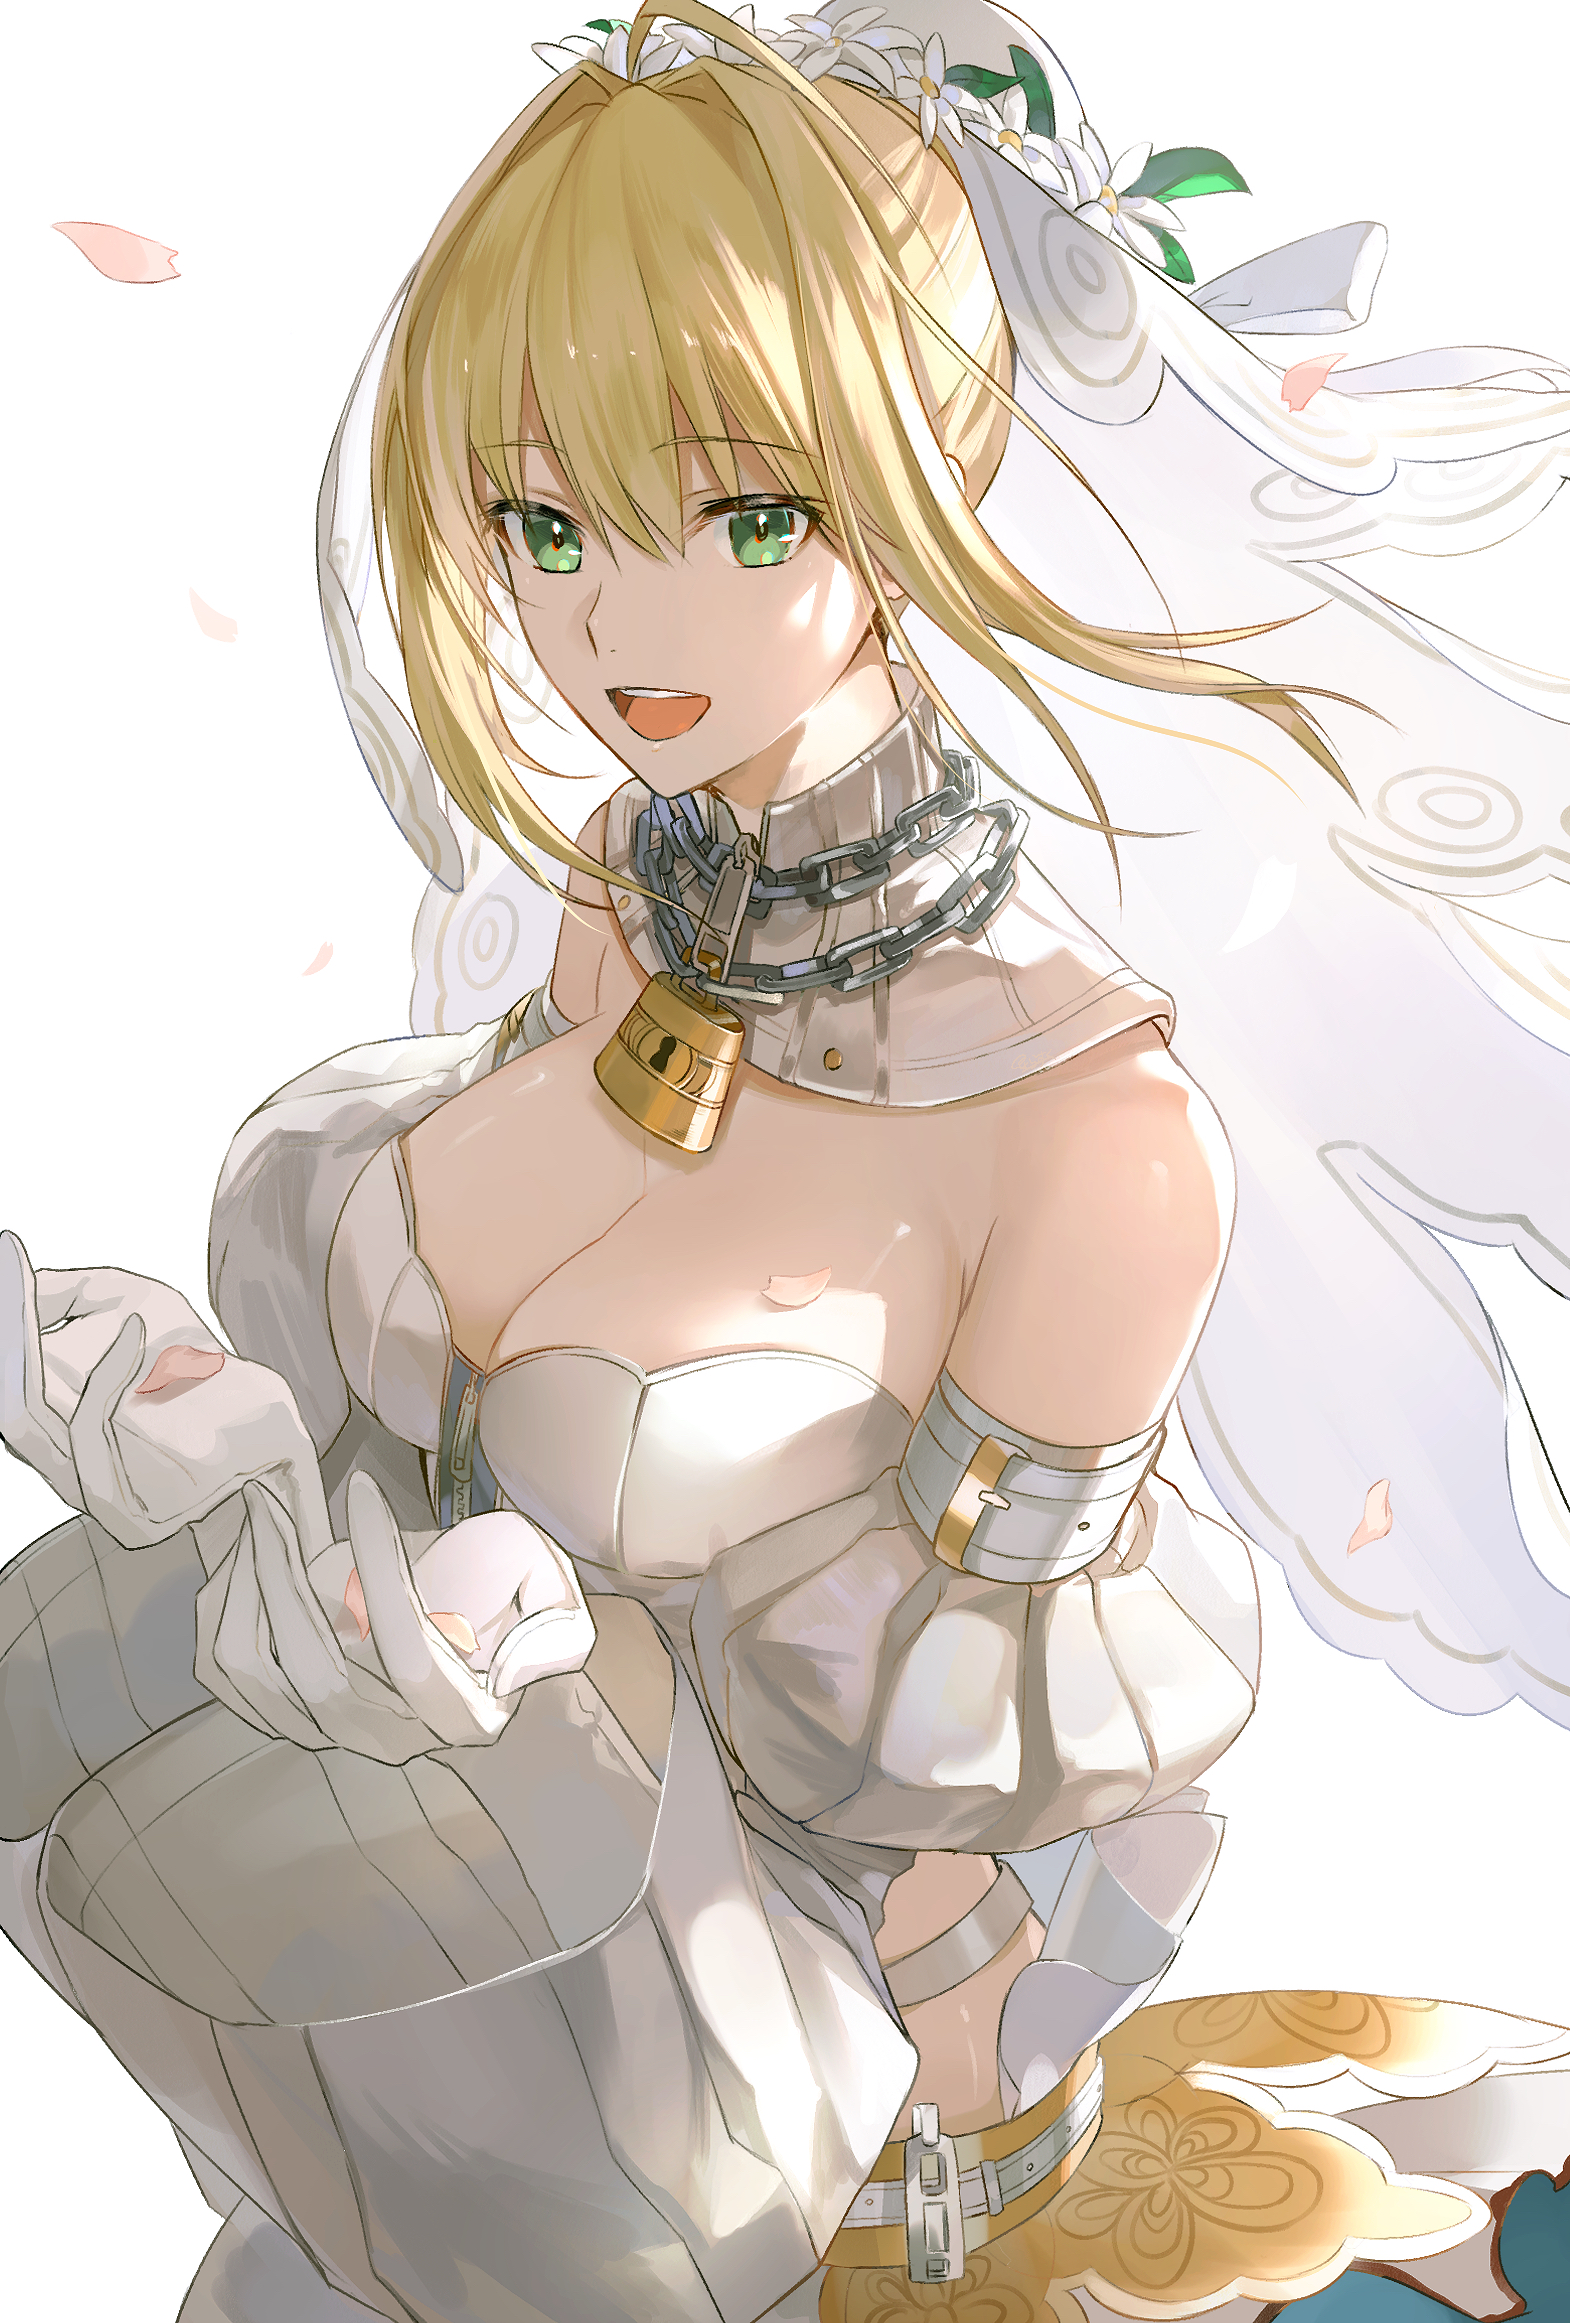 Anime 1570x2323 anime anime girls Fate series Fate/Extra Fate/Extra CCC Fate/Grand Order Nero Claudius blonde long hair solo artwork digital art fan art green eyes